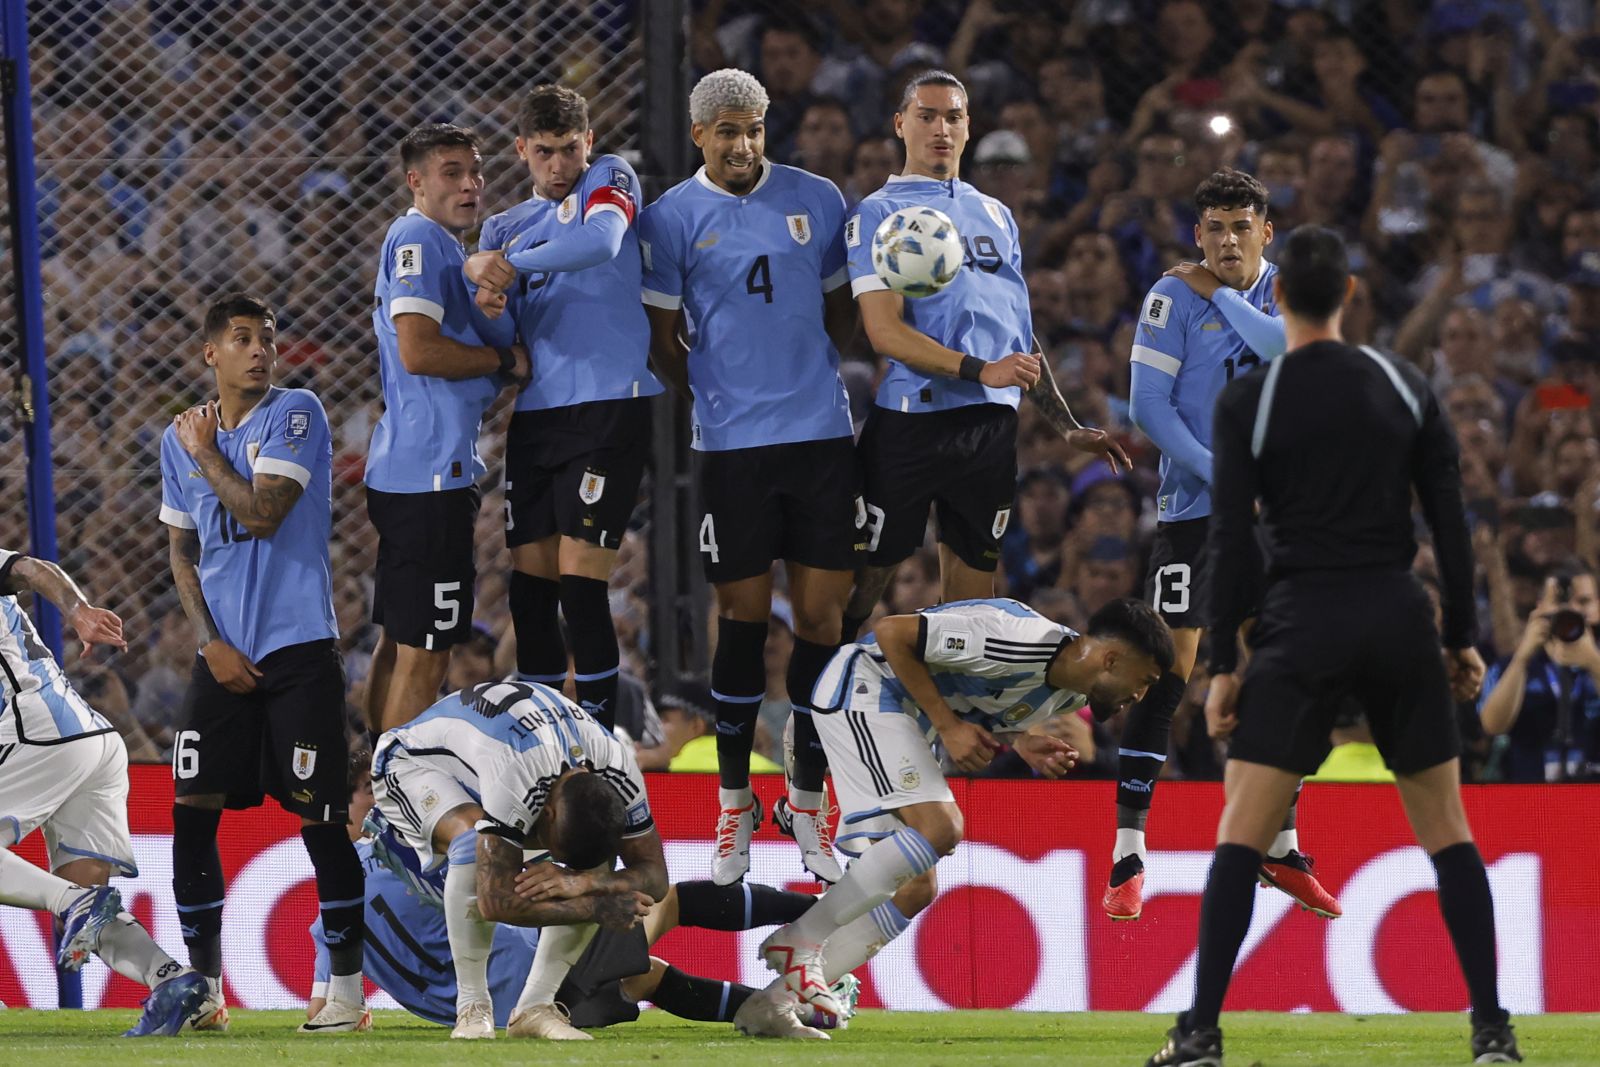 epa10979881 Players of Uruguay in action during a penalty kick during a FIFA 2026 World Cup qualifiers soccer match between Argentina and Uruguay at La Bombonera stadium in Buenos Aires, Argentina, 16 November 2023.  EPA/JUAN IGNACIO RONCORONI